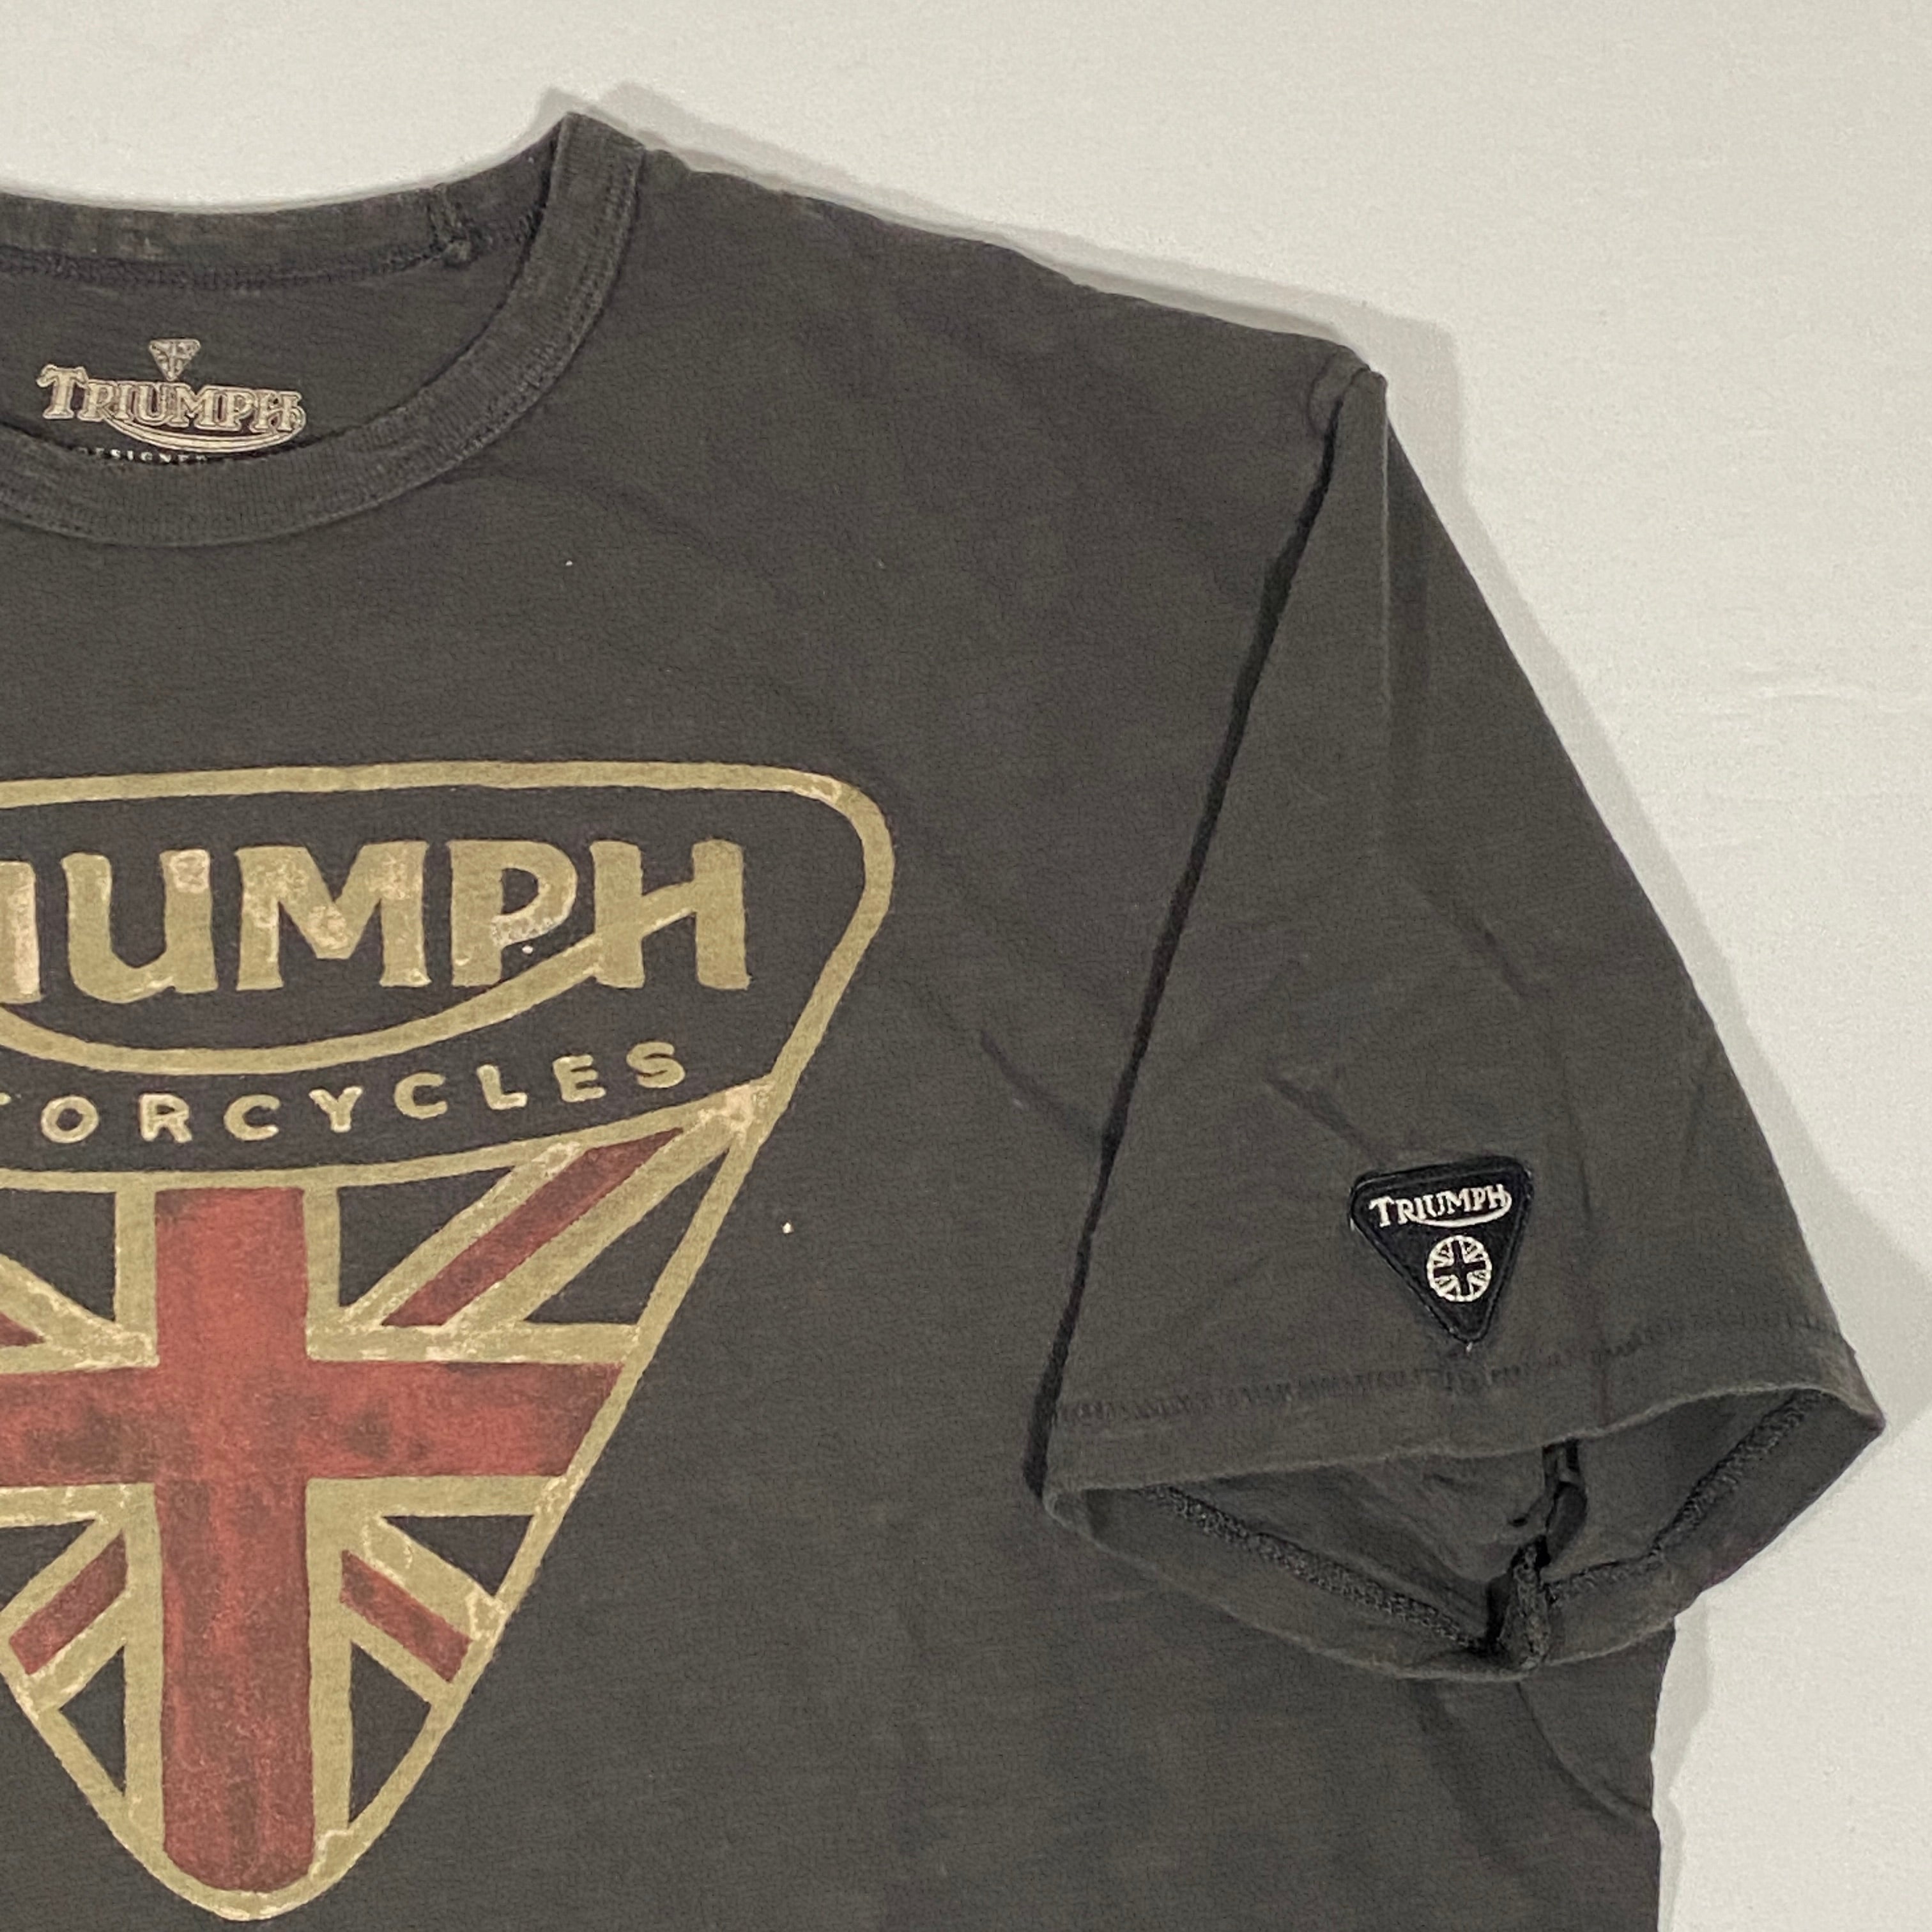 Lucky Brand Triumph motorcycles graphic tee  Lucky brand tops, Lucky brand,  Clothes design